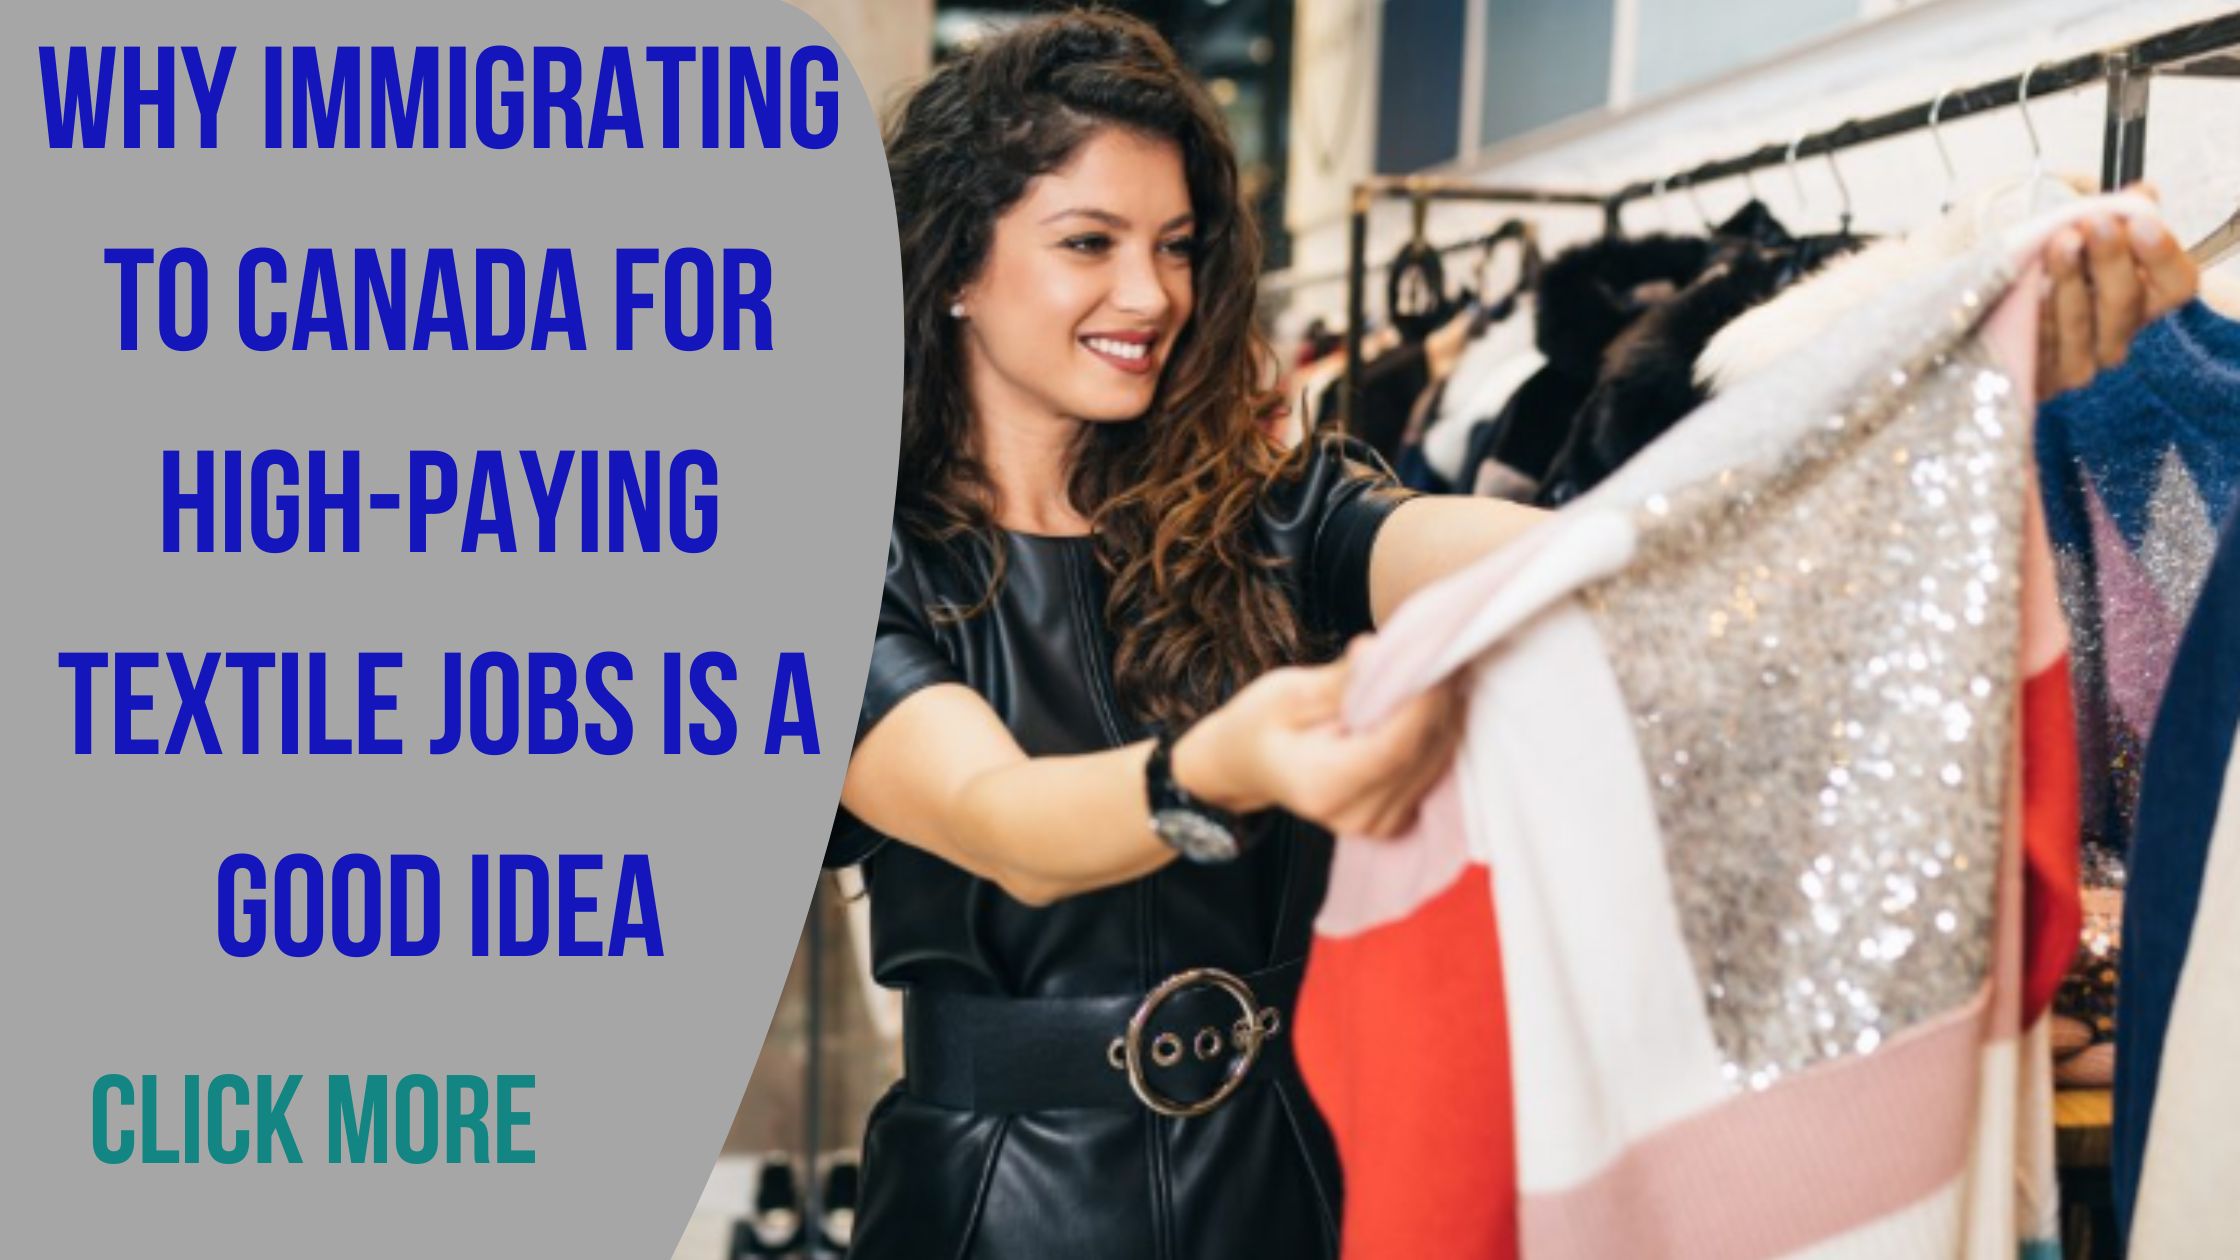 Immigrating to Canada for High-Paying Textile Jobs